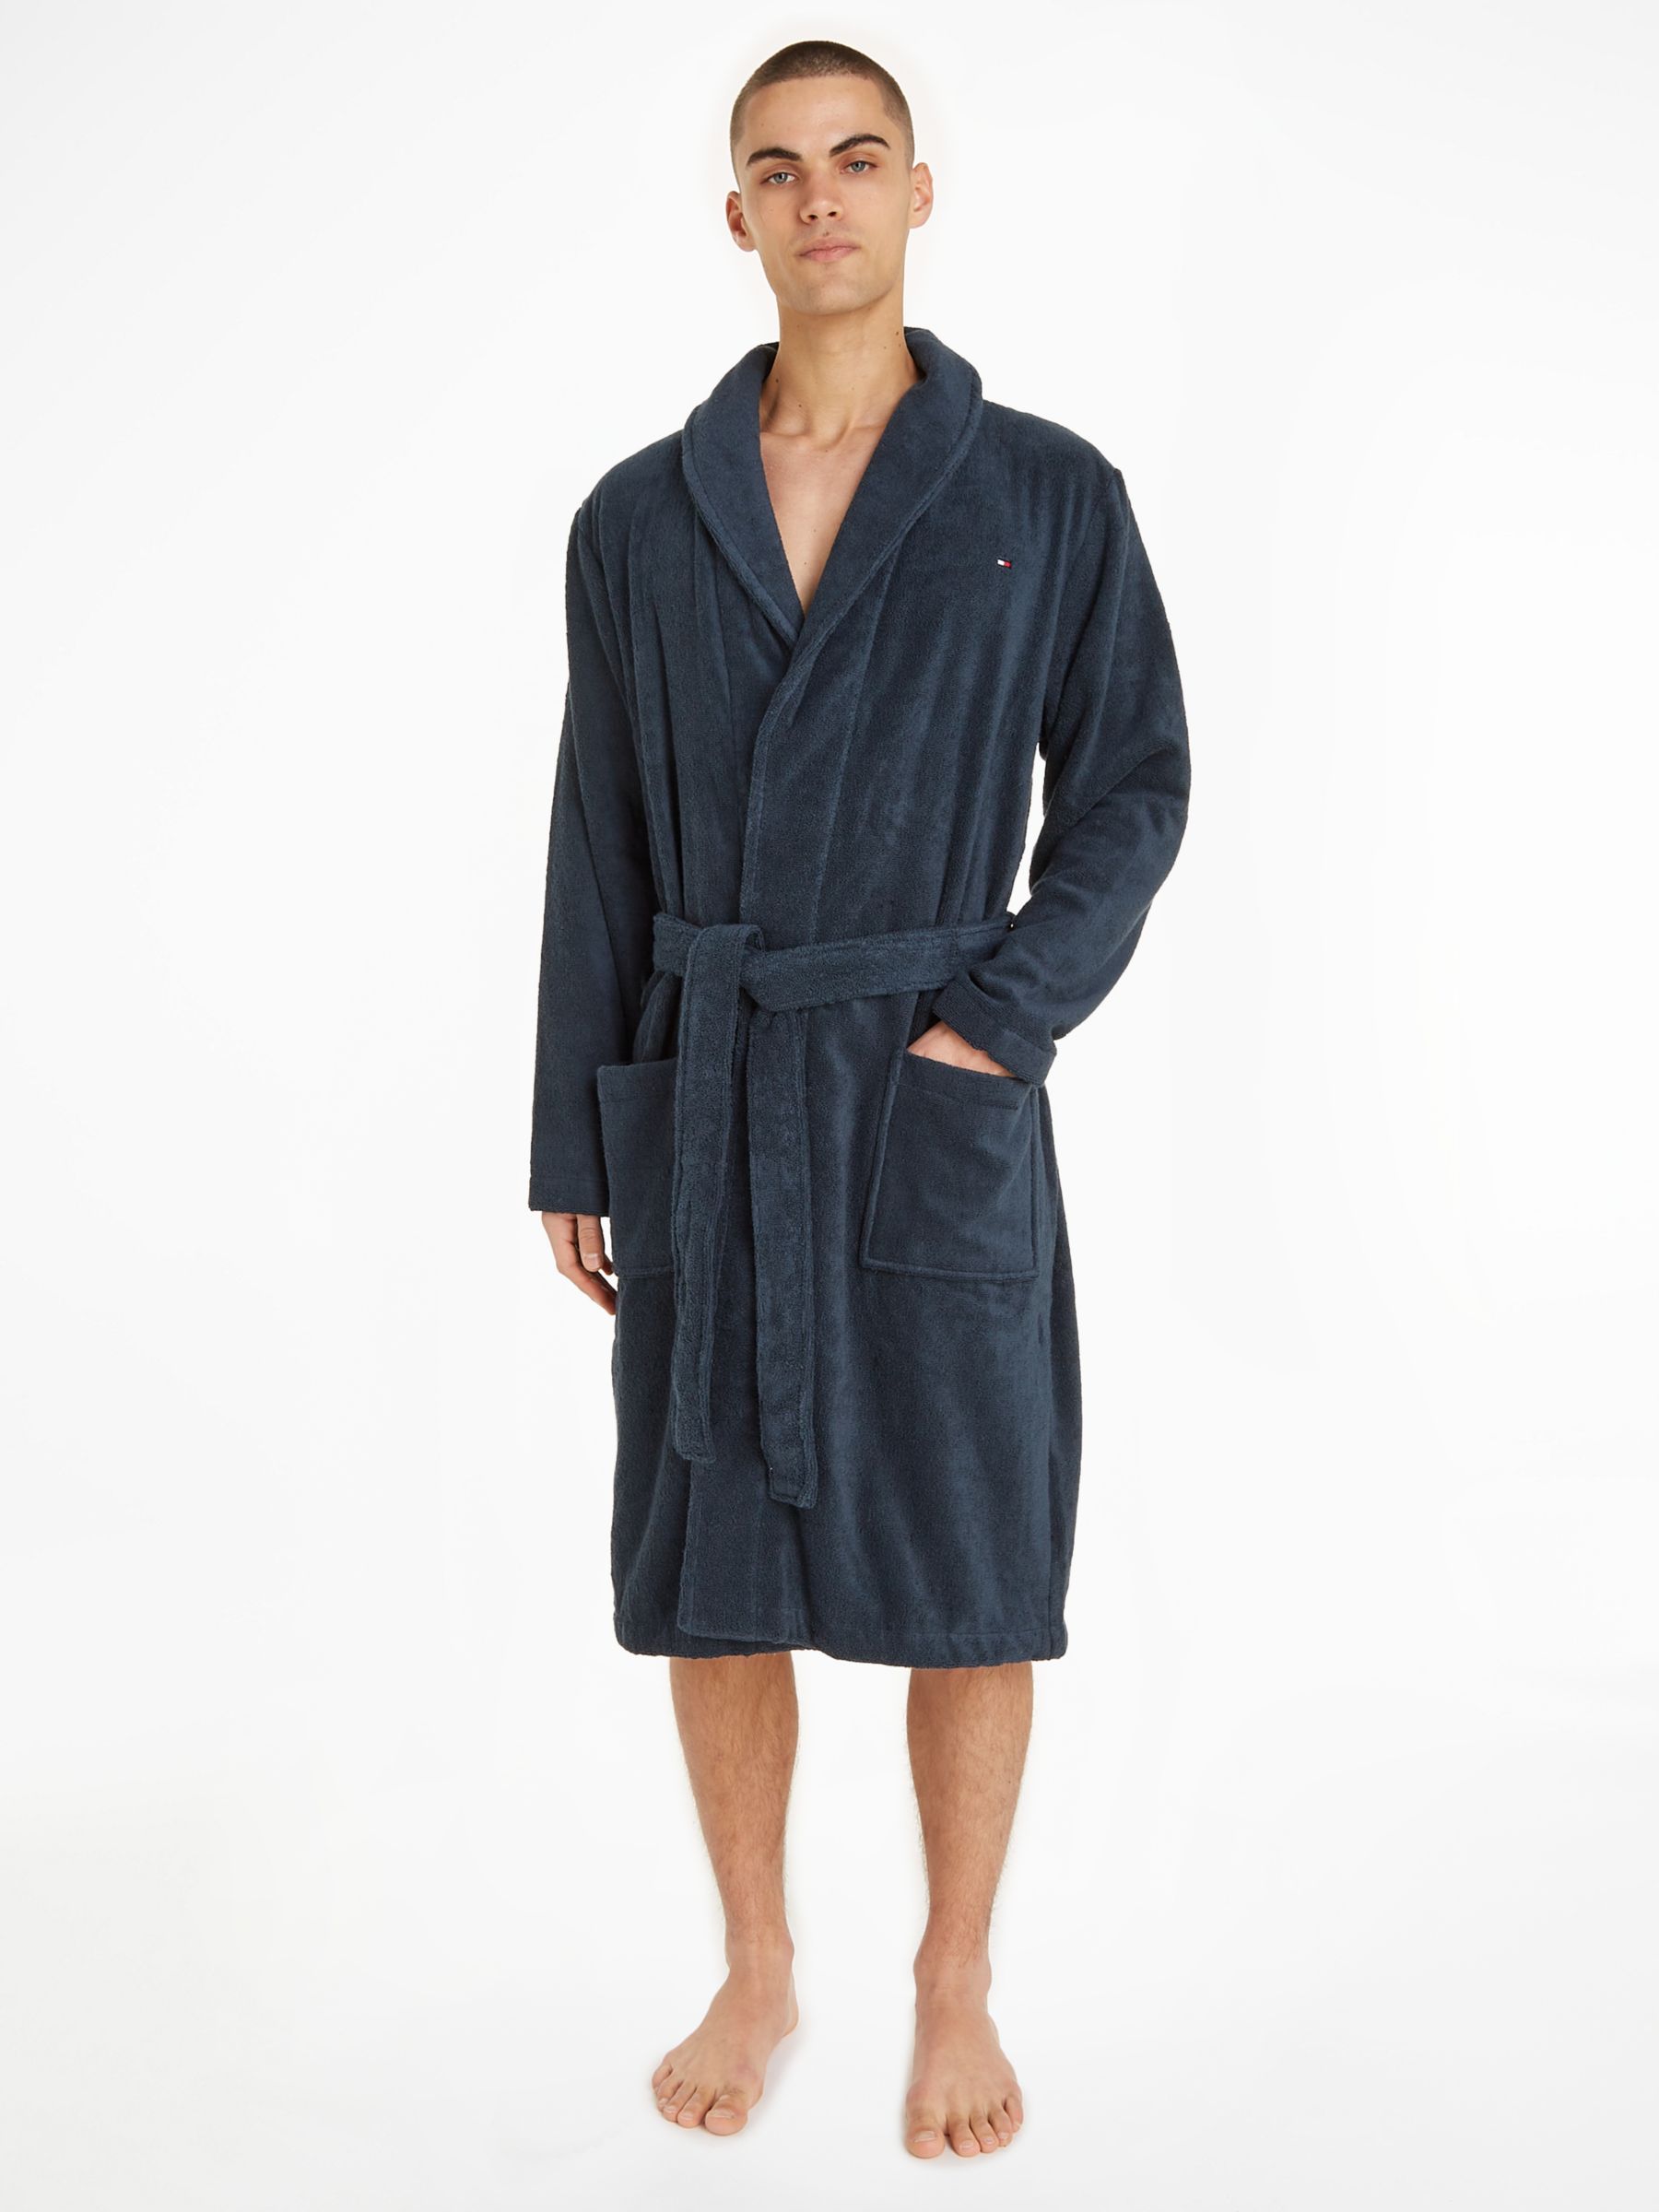 pave føderation ordlyd Tommy Hilfiger Pure Cotton Towelling Robe, Navy Blazer at John Lewis &  Partners